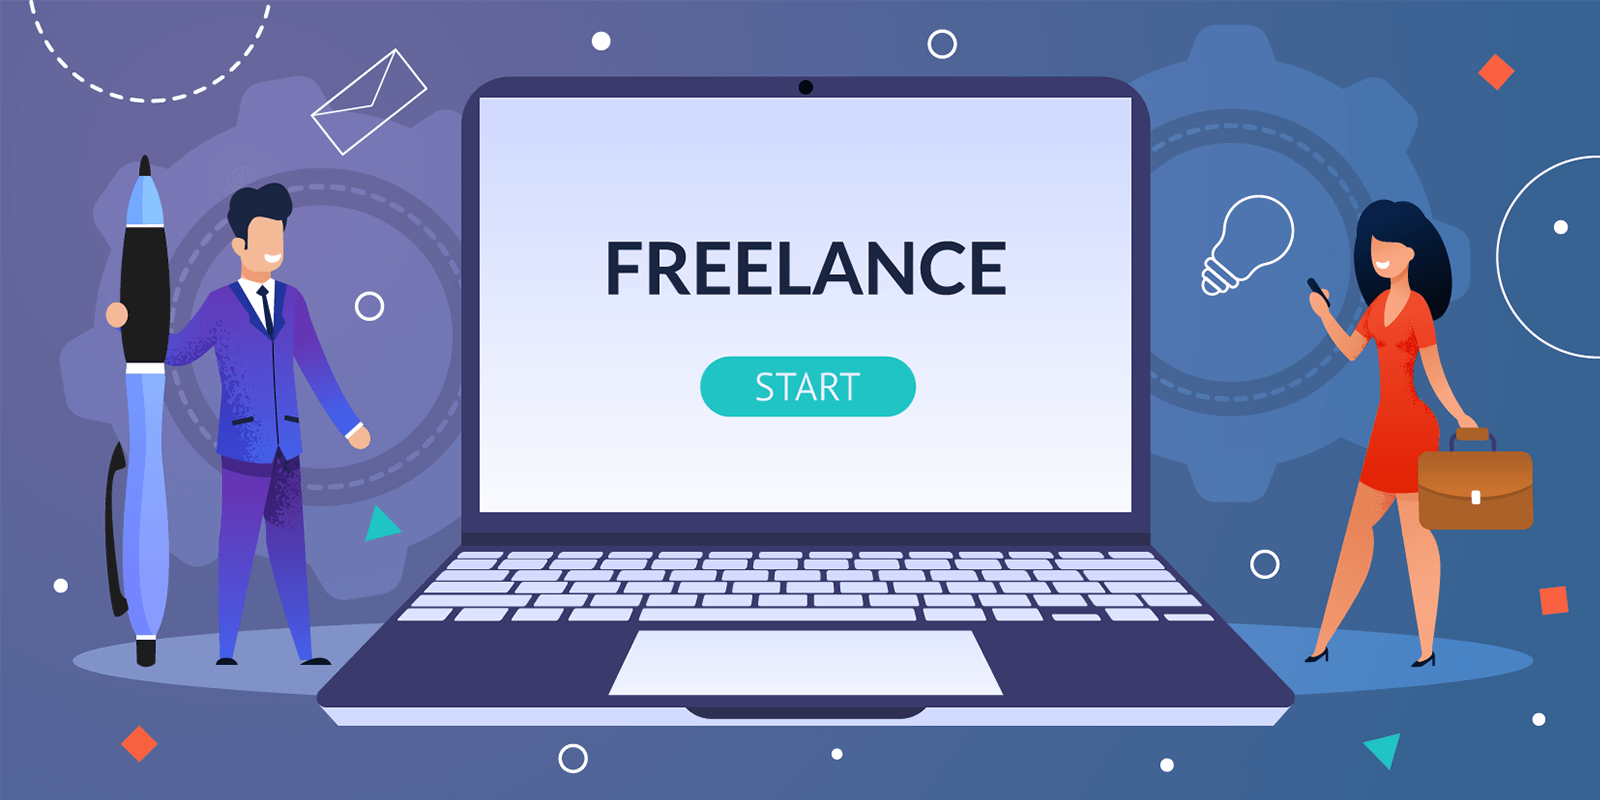 25 Companies That Hire for Remote Freelance Jobs | FlexJobs